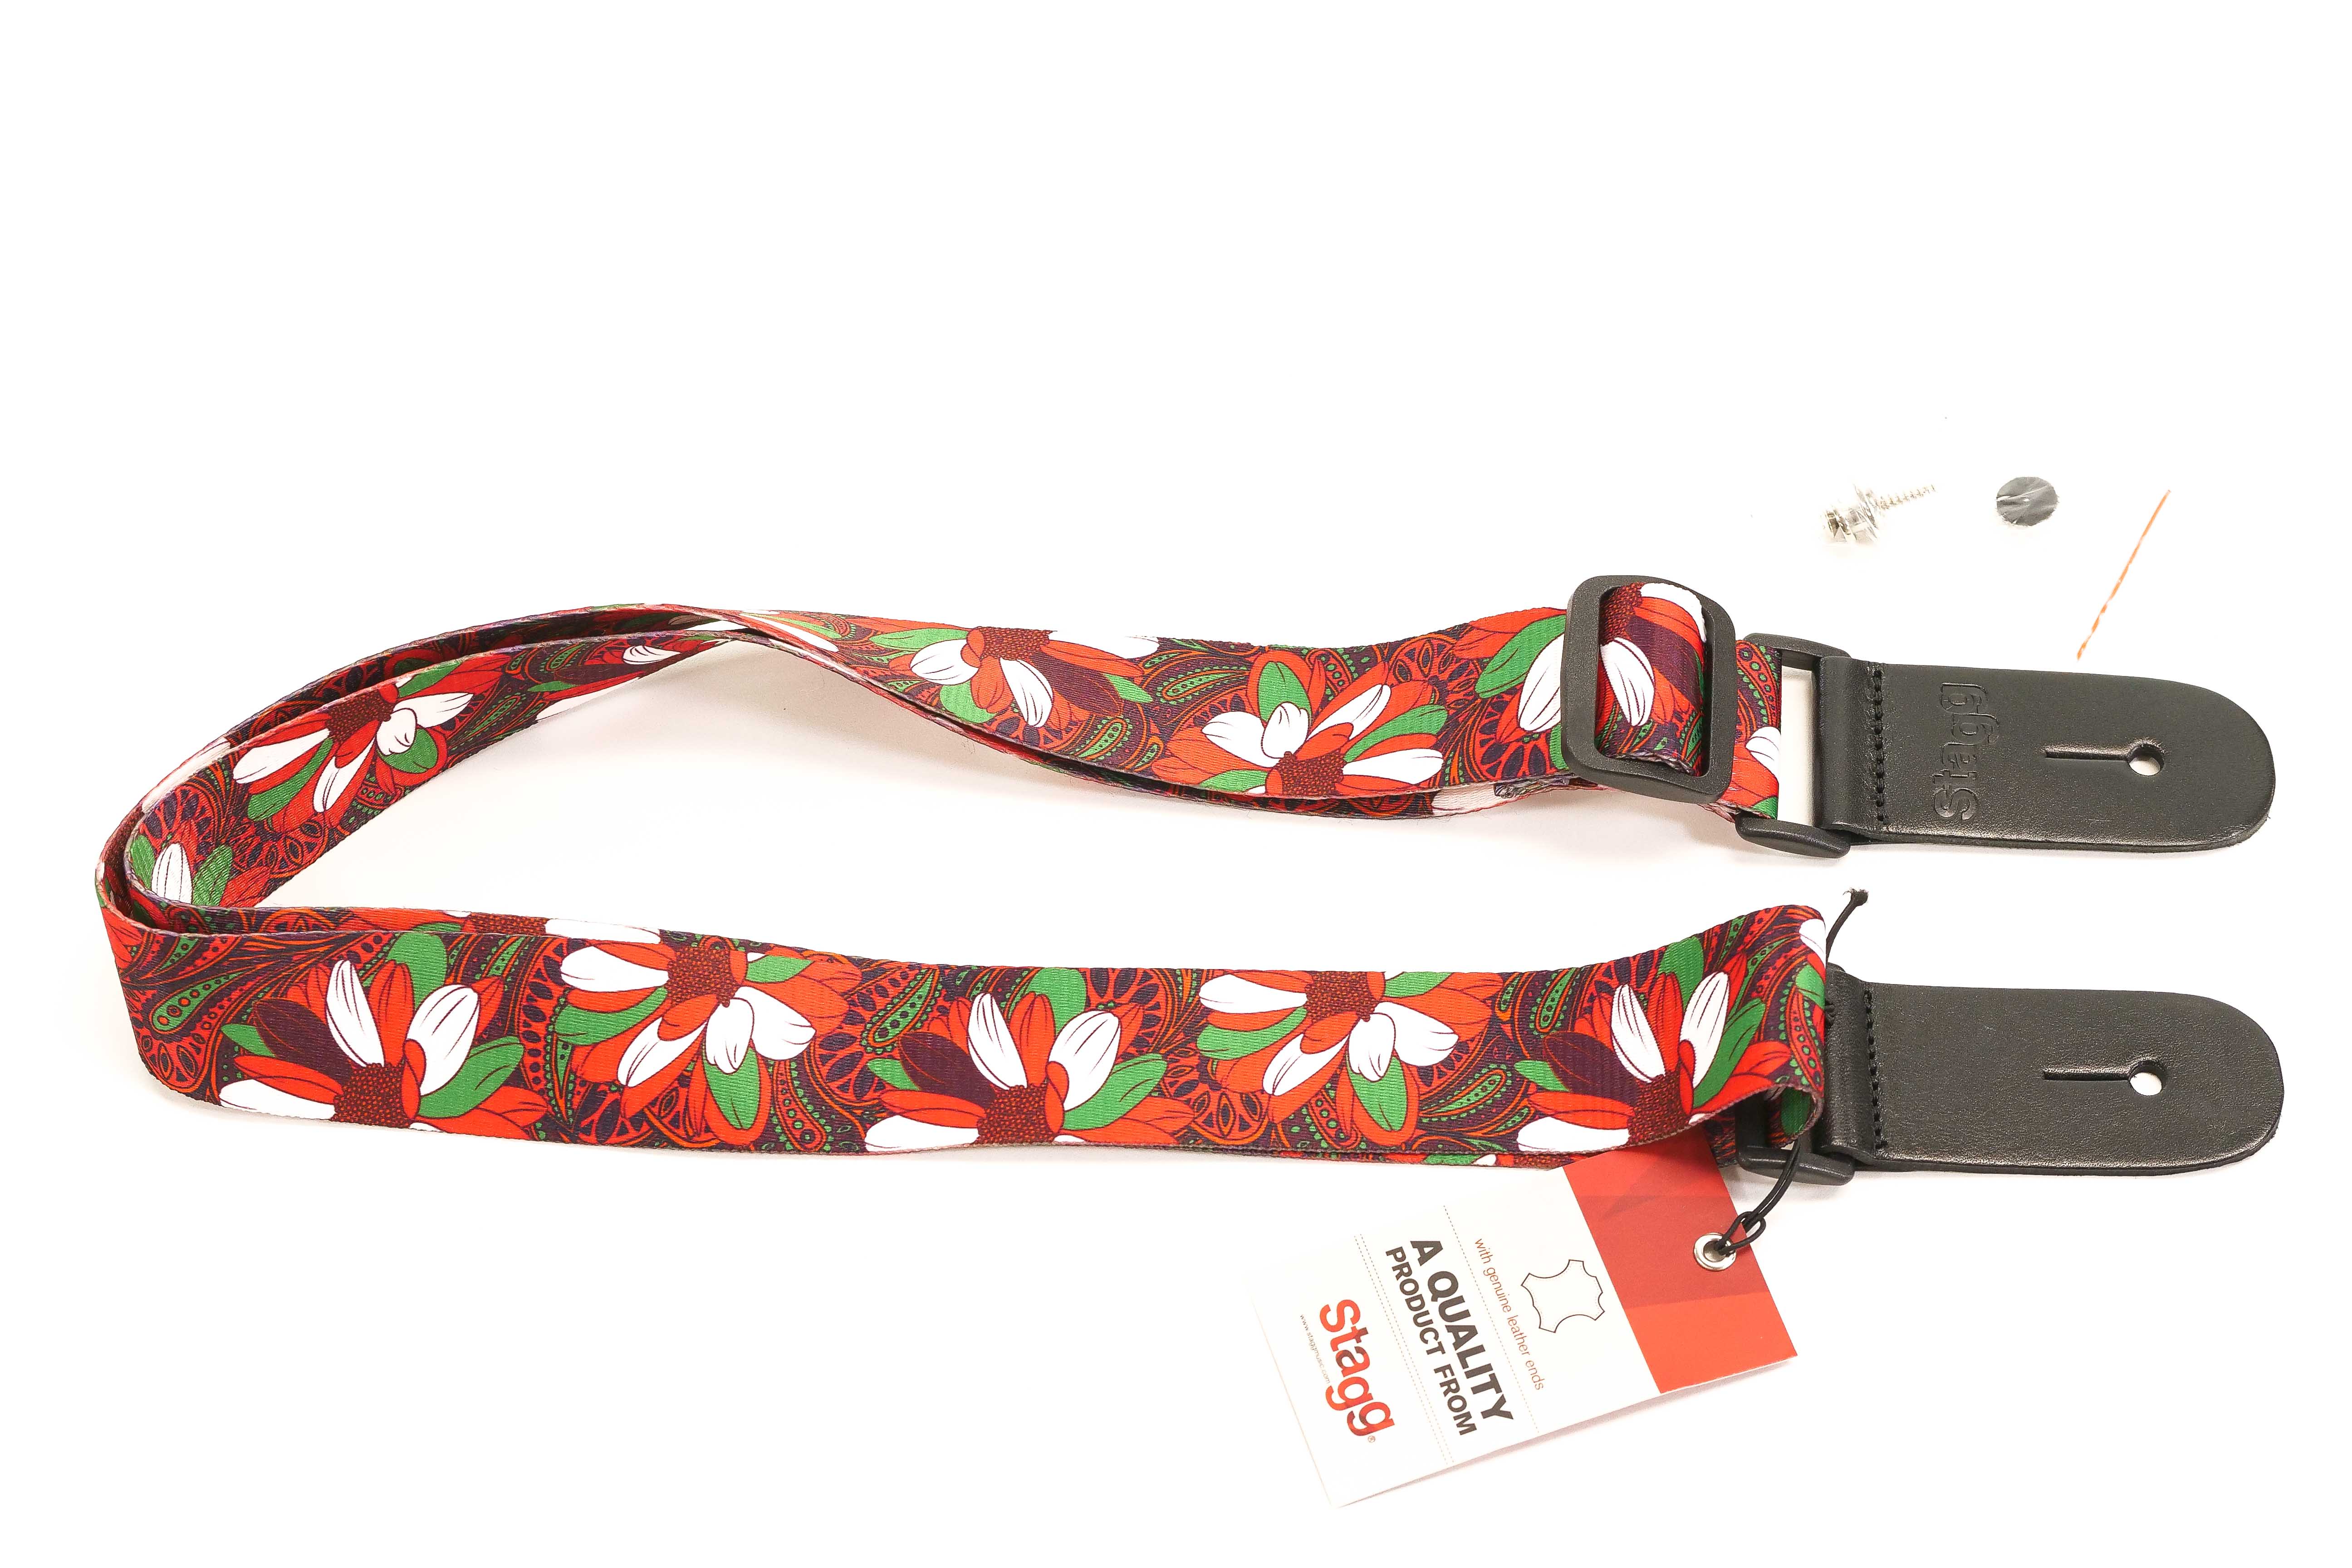 Stagg 1.5 Inch Terylen Ukulele and Guitar Strap - FLOWER RED